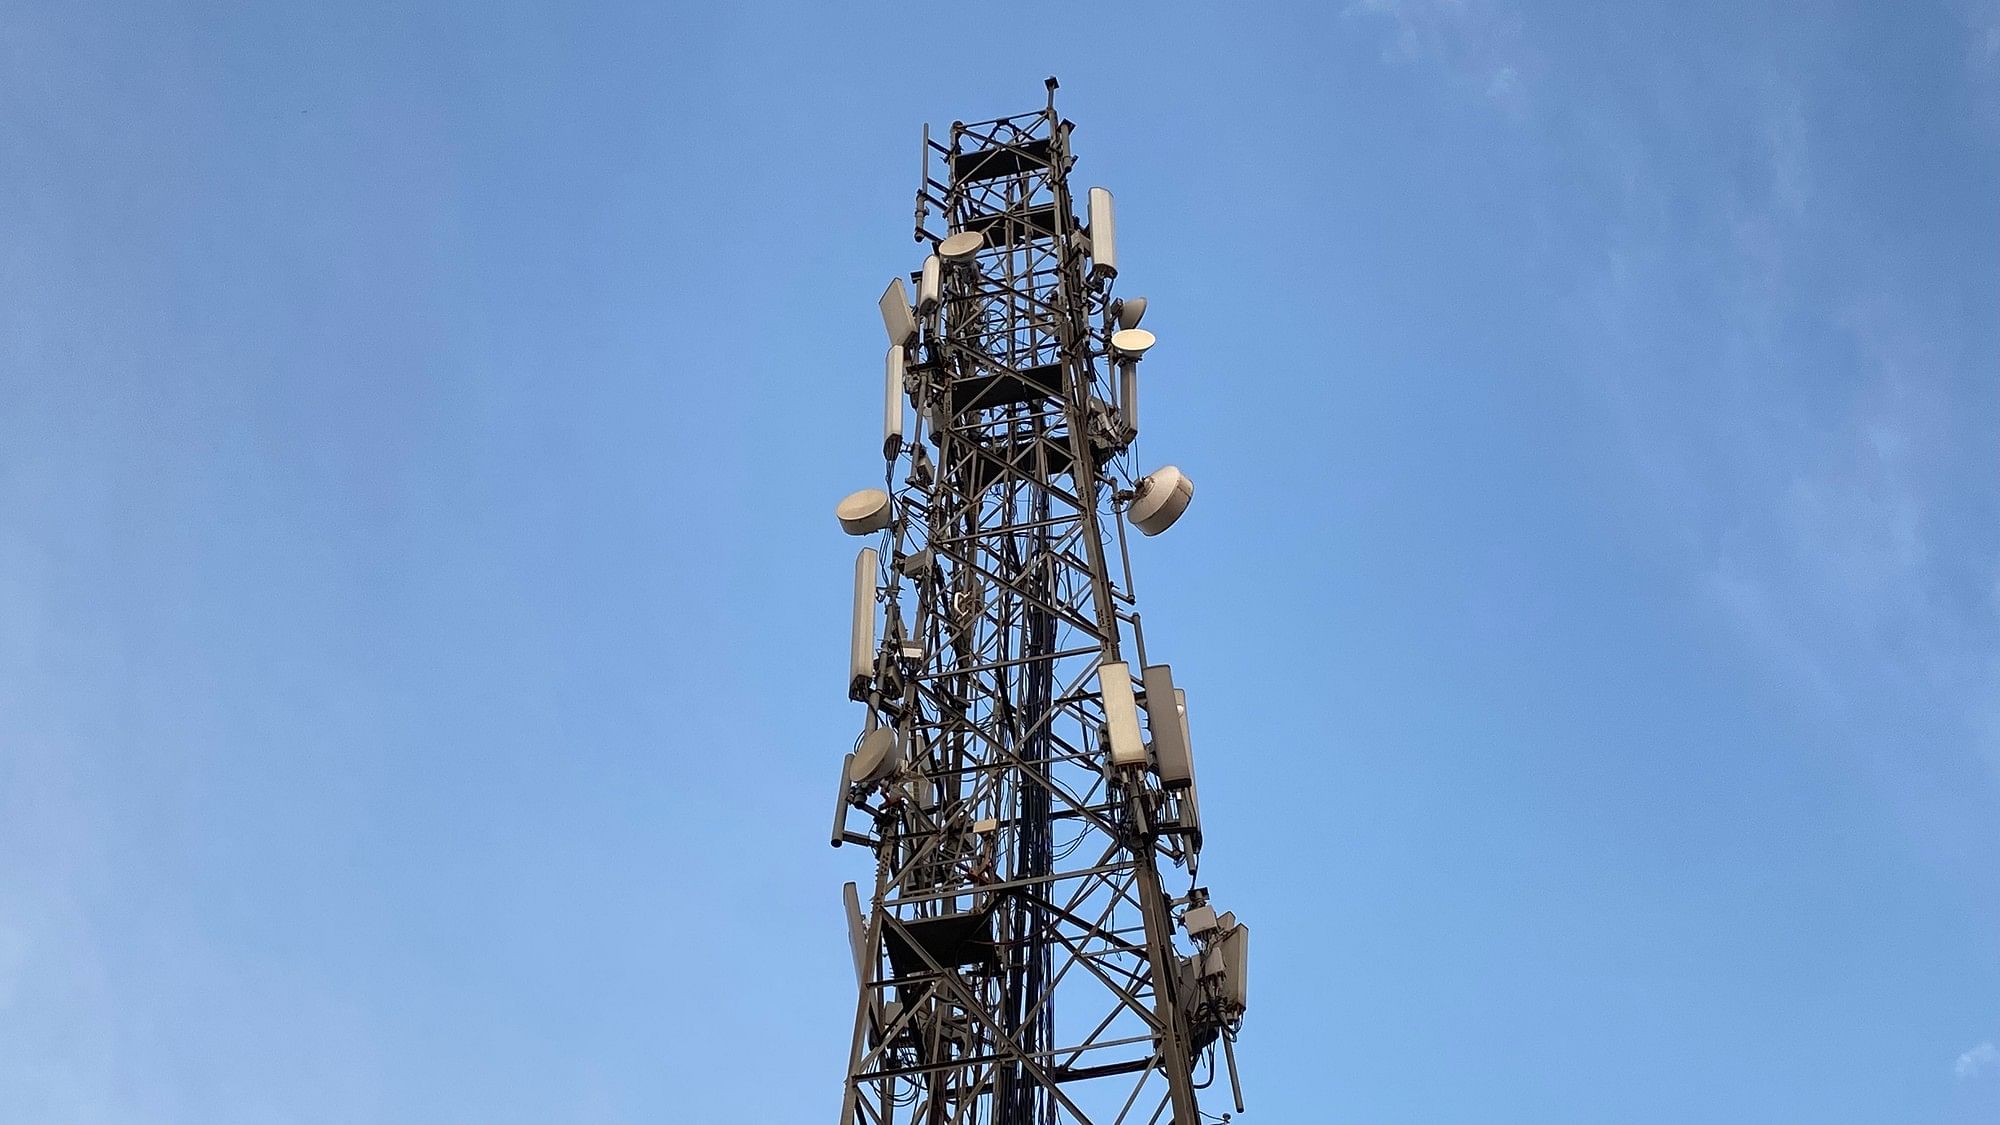 <div class="paragraphs"><p>A mobile tower is seen in the photo.&nbsp;</p></div>